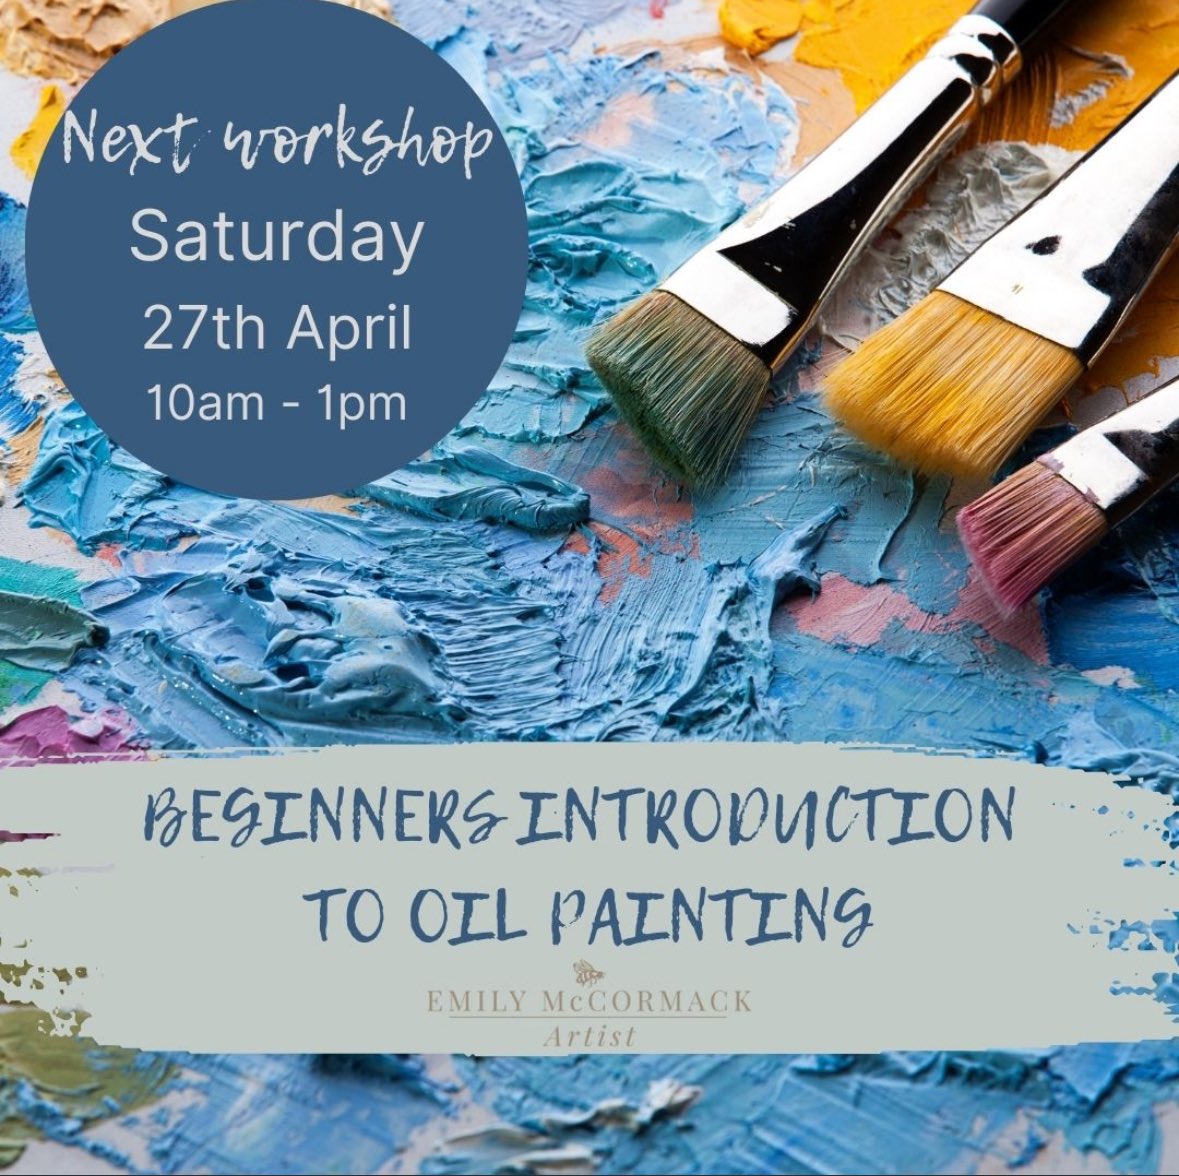 Good Evening, great day on Merrion Square today, if you are looking to start your own creative journey why not join us this saturday for a beginners introduction to oil painting - see website for full details #Sunday #sundayevening